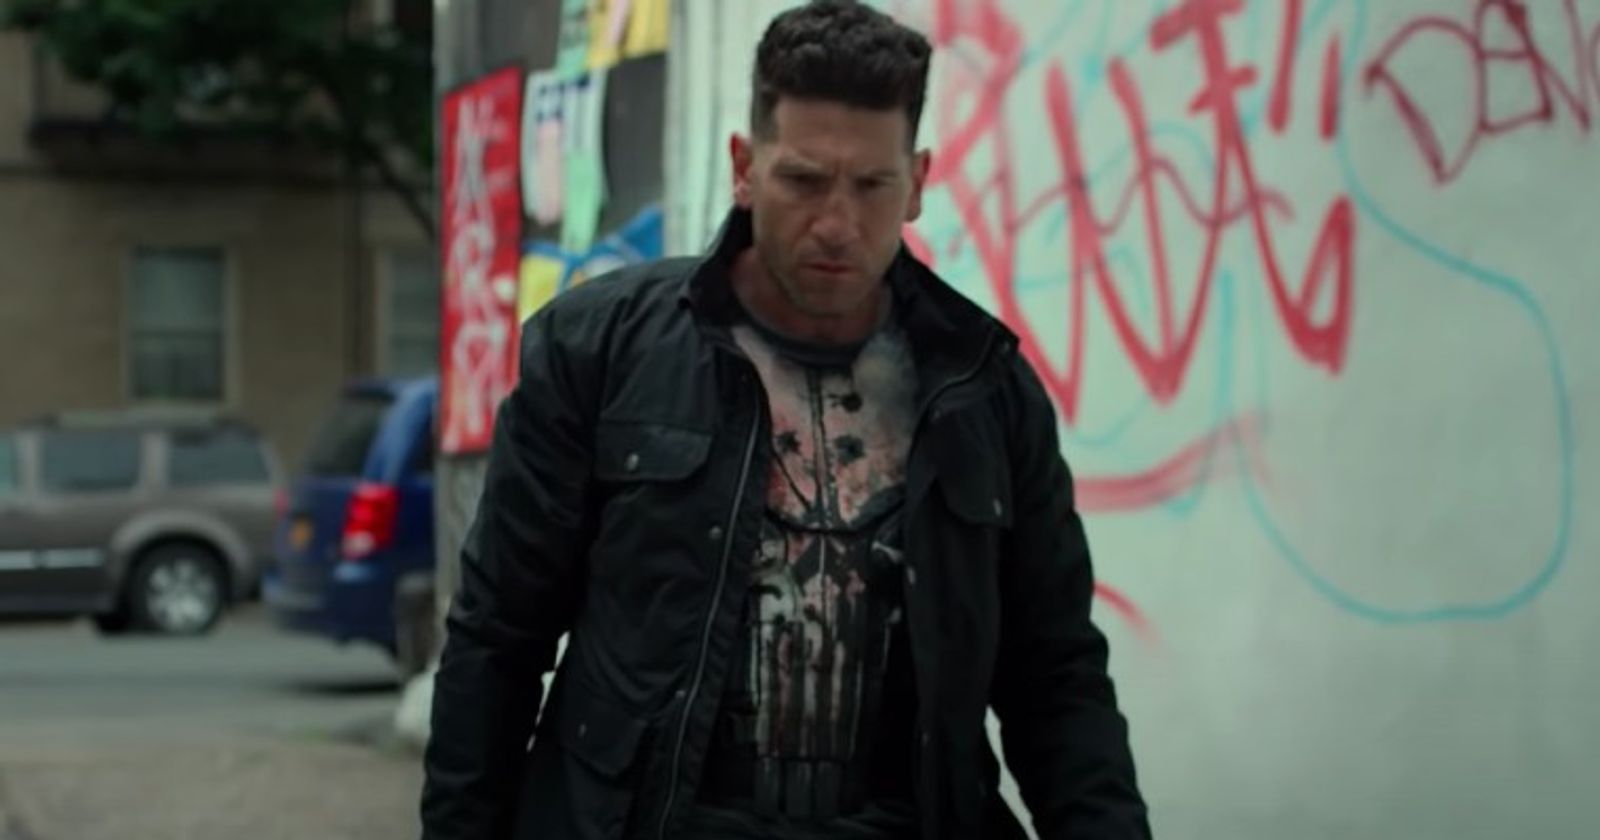 Jon Bernthal wants to return as Punisher, but there's a catch